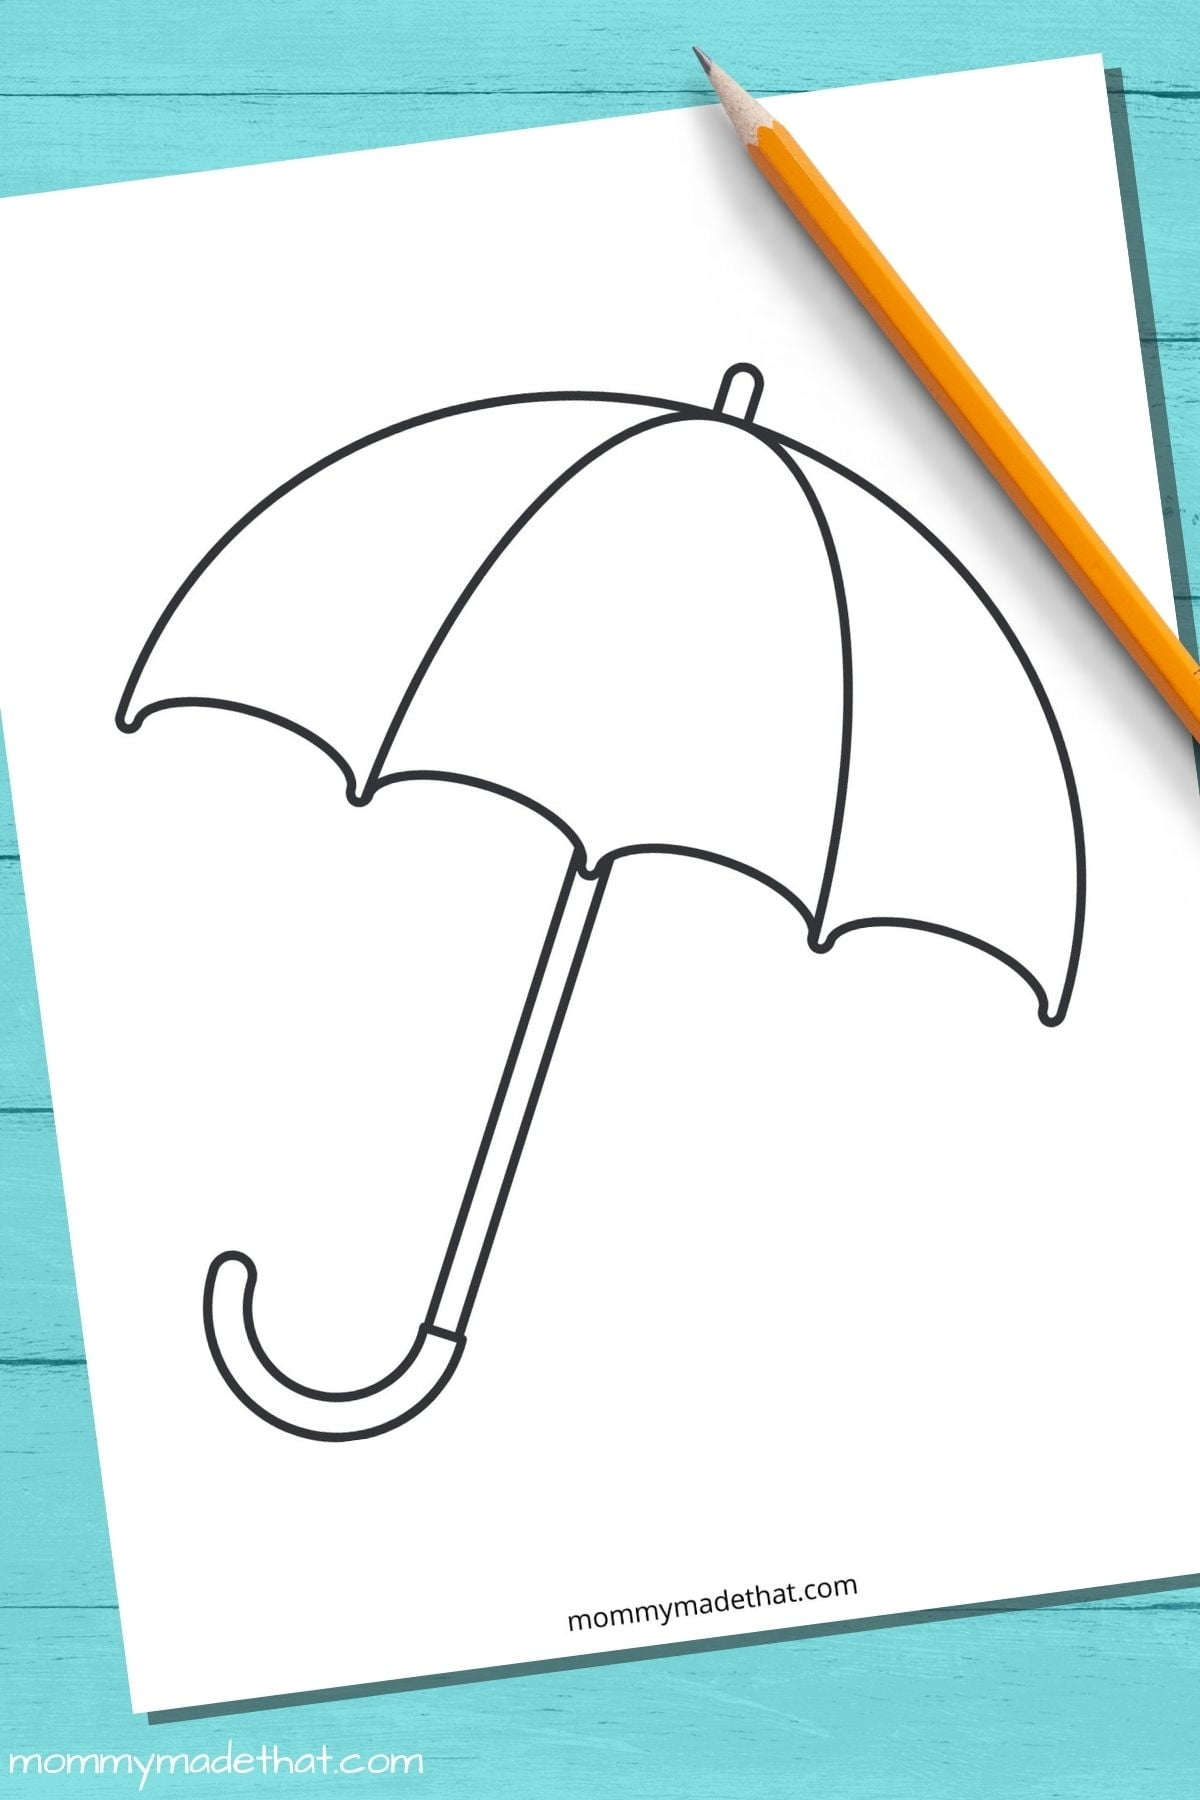 umbrella-template-and-outlines-free-printables-free-printable